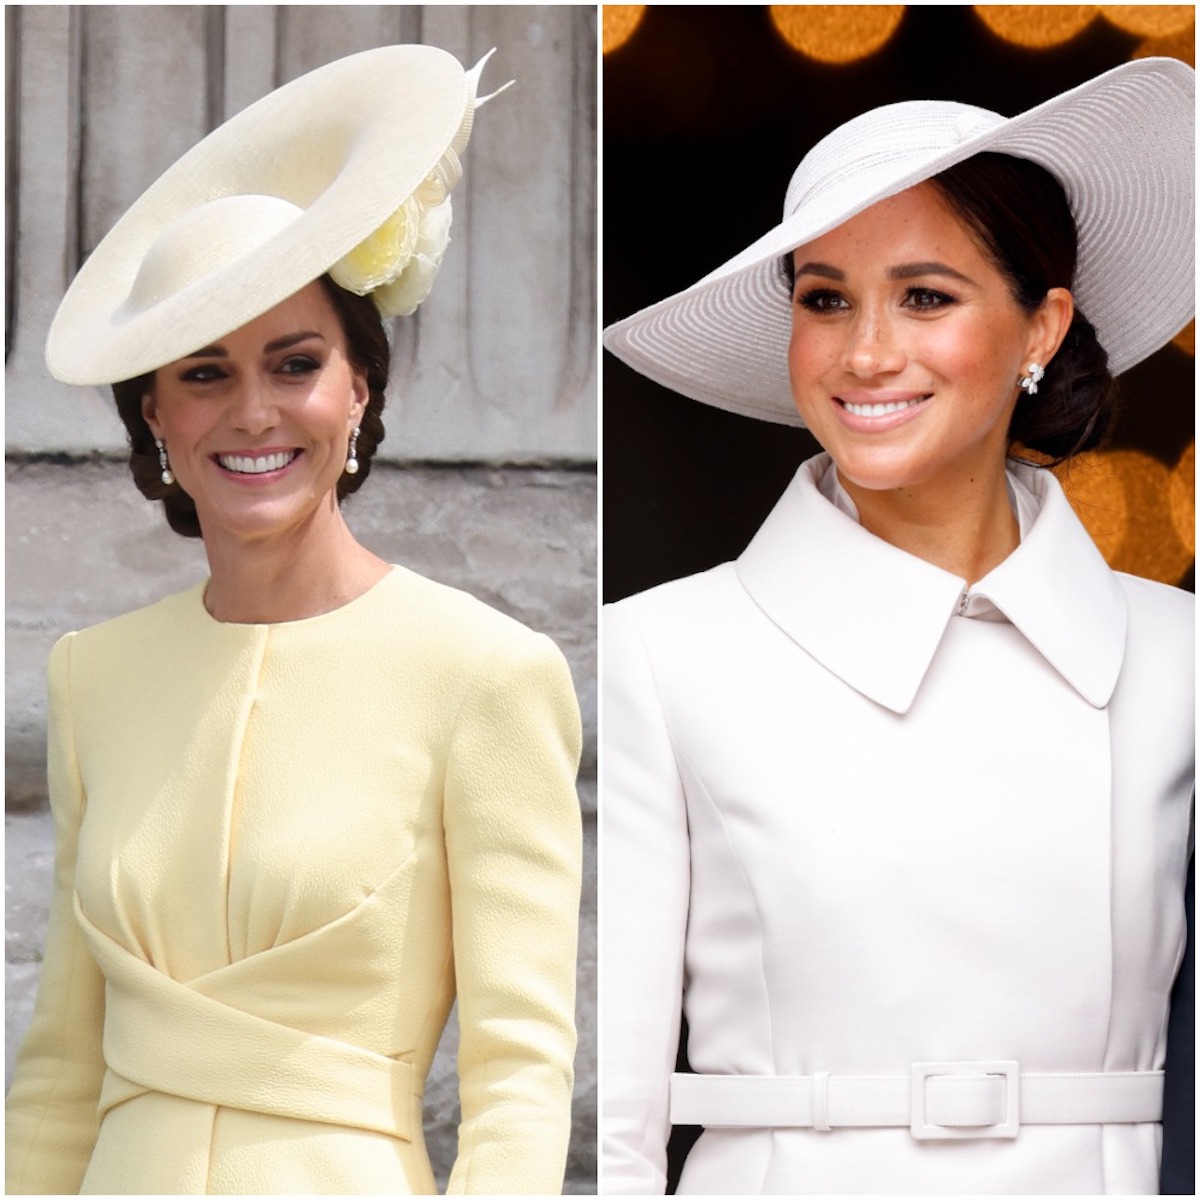 Kate Middleton, who an expert says appeared 'in step' with Meghan Markle, looks on; Meghan Markle looks on at St. Paul's Cathedral for a Platinum Jubilee service